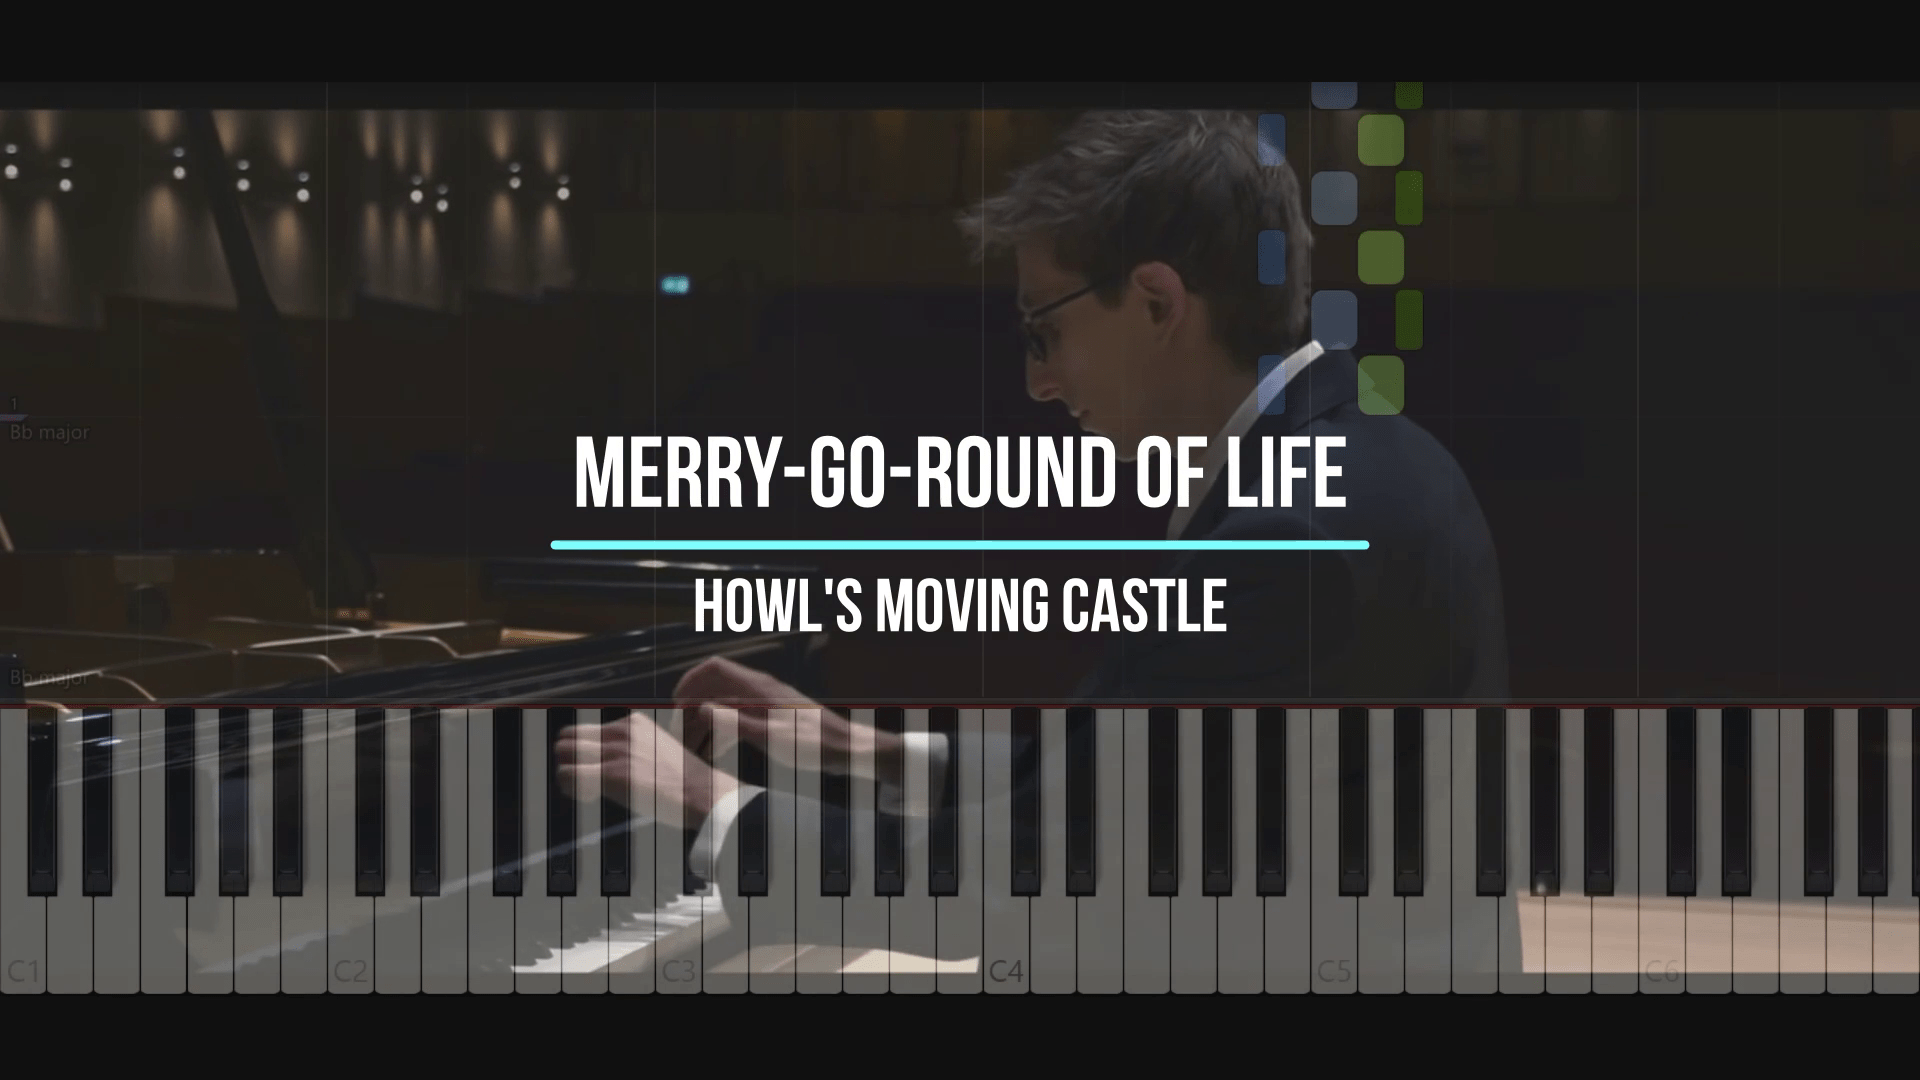 Merry go Round of Life Joe Hisaishi. Merry-go-Round of Life (from "Howl's moving Castle"). Merry go Round of Life табы. Merry go Round of Life Howl's moving Castle OST for Meow перевод. Merry go round joe hisaishi